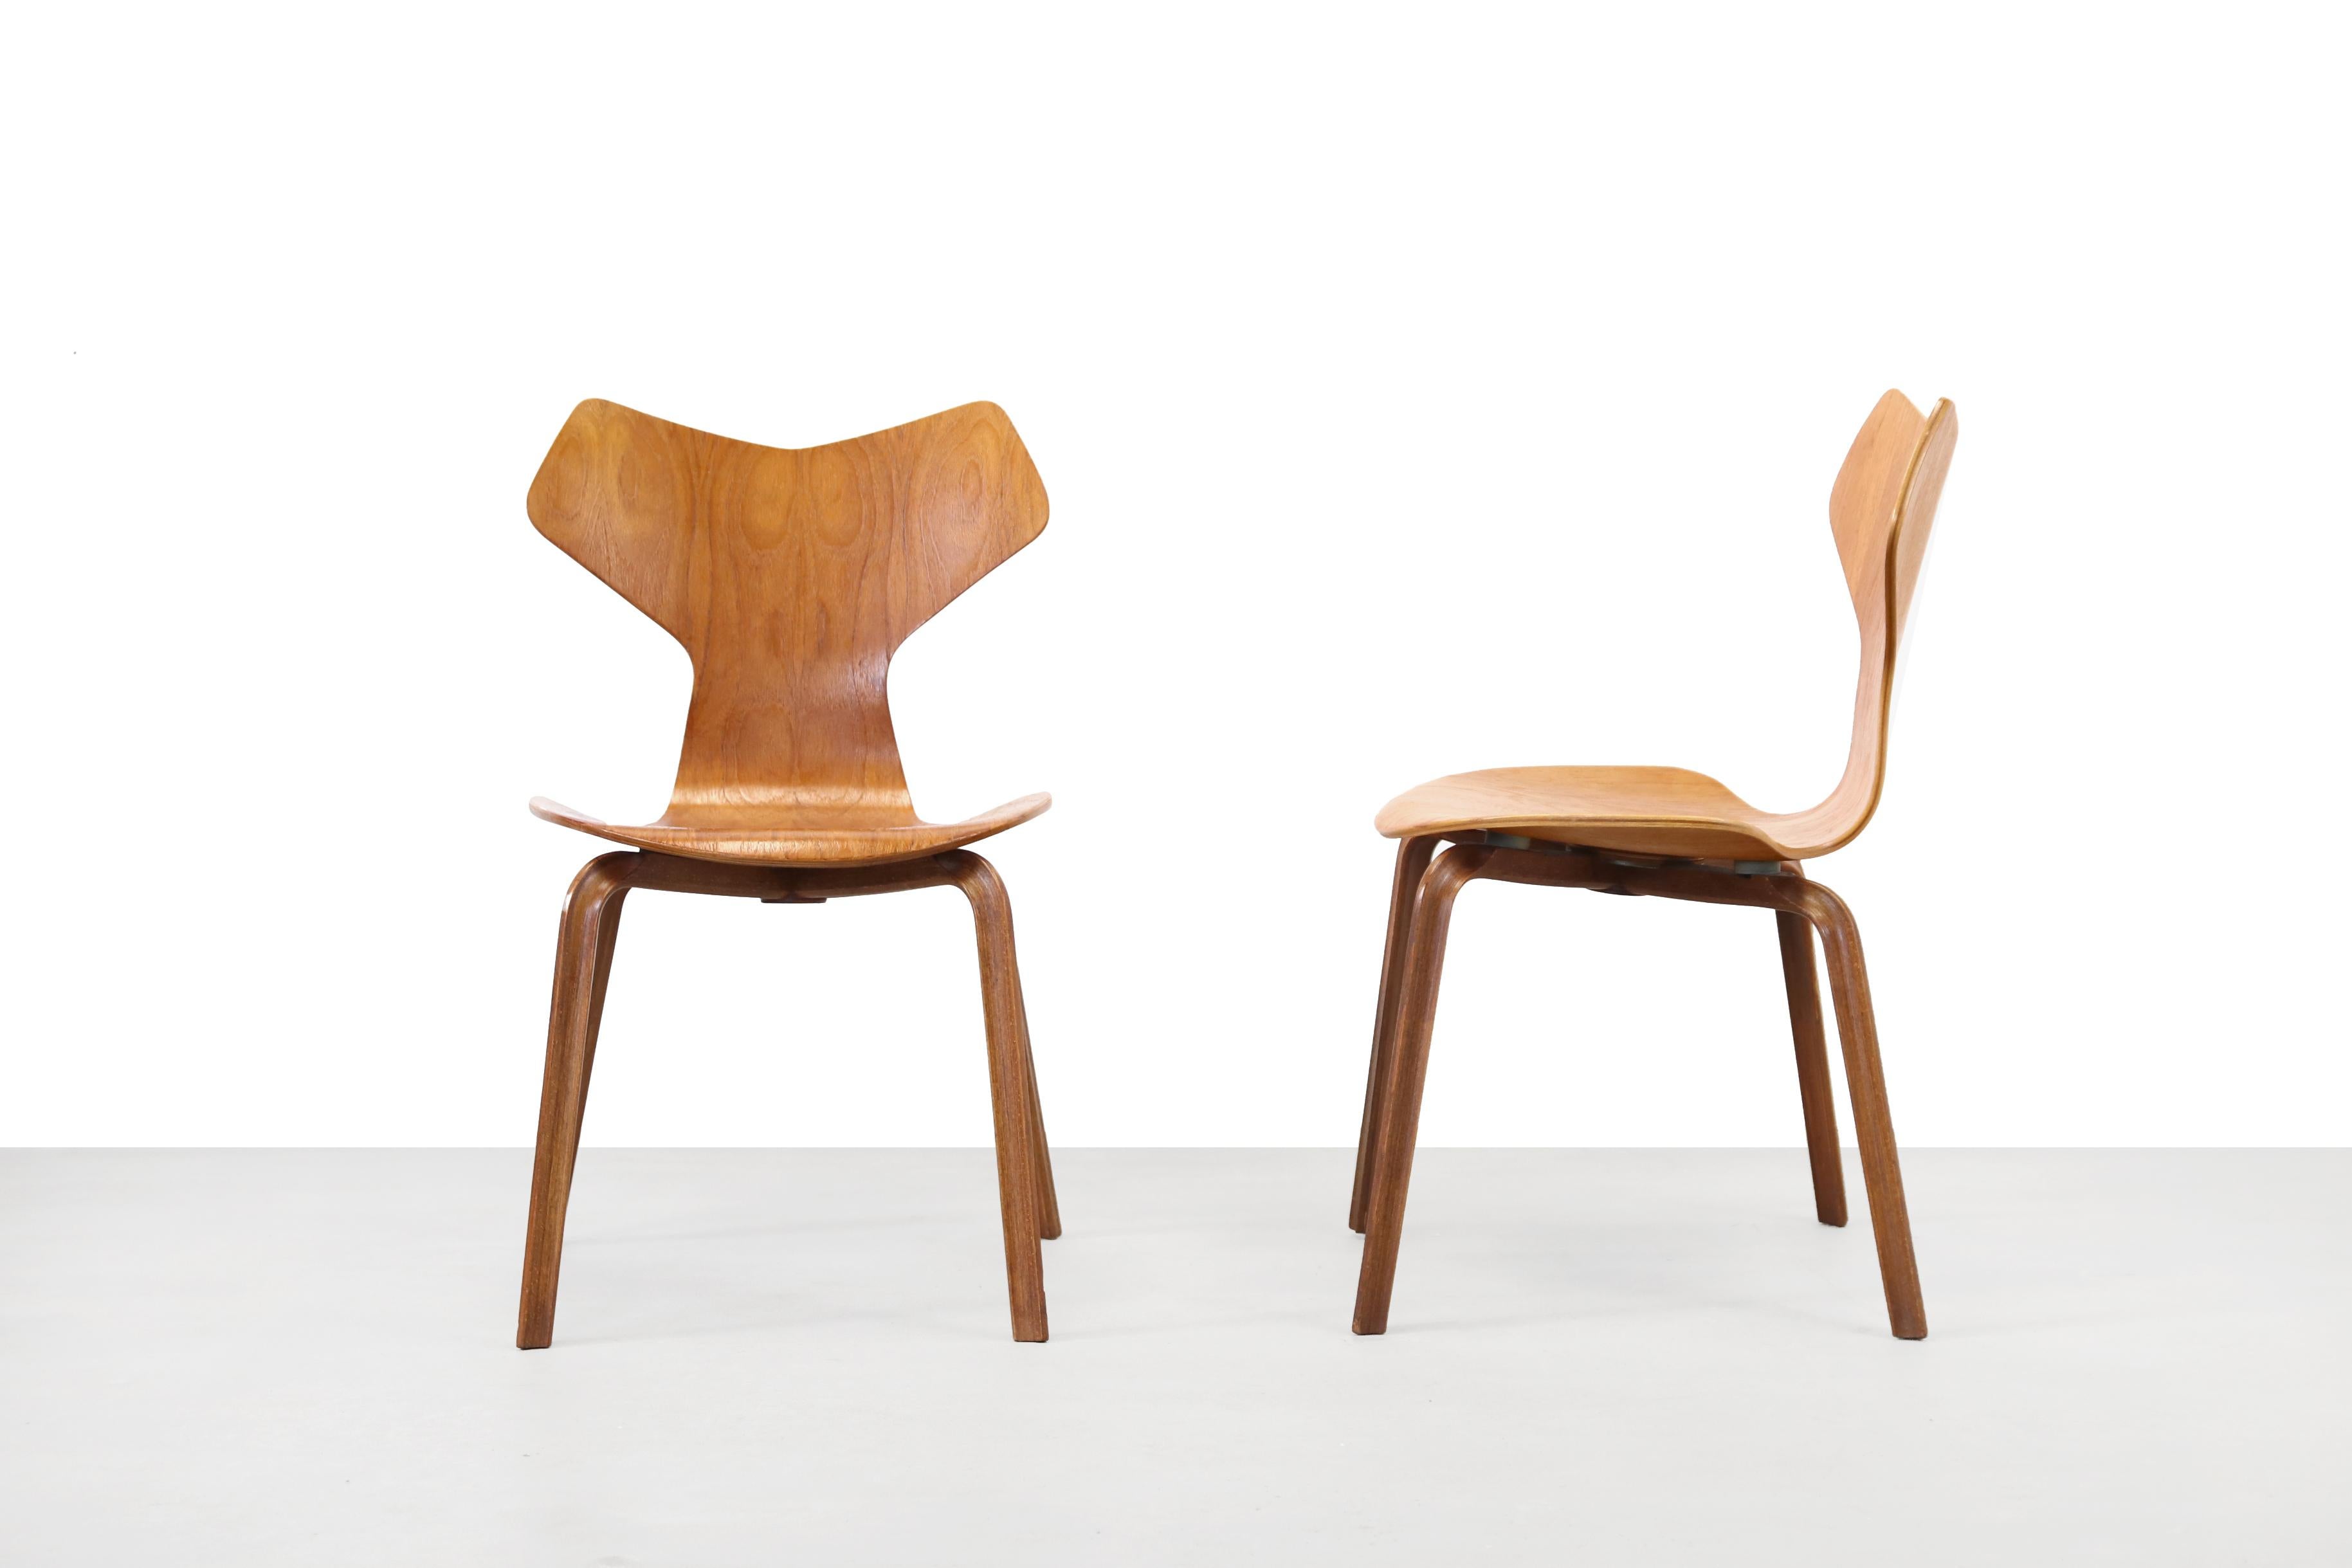 Two vintage teak Grand Prix chairs by Arne Jacobsen. These chairs were designed as 